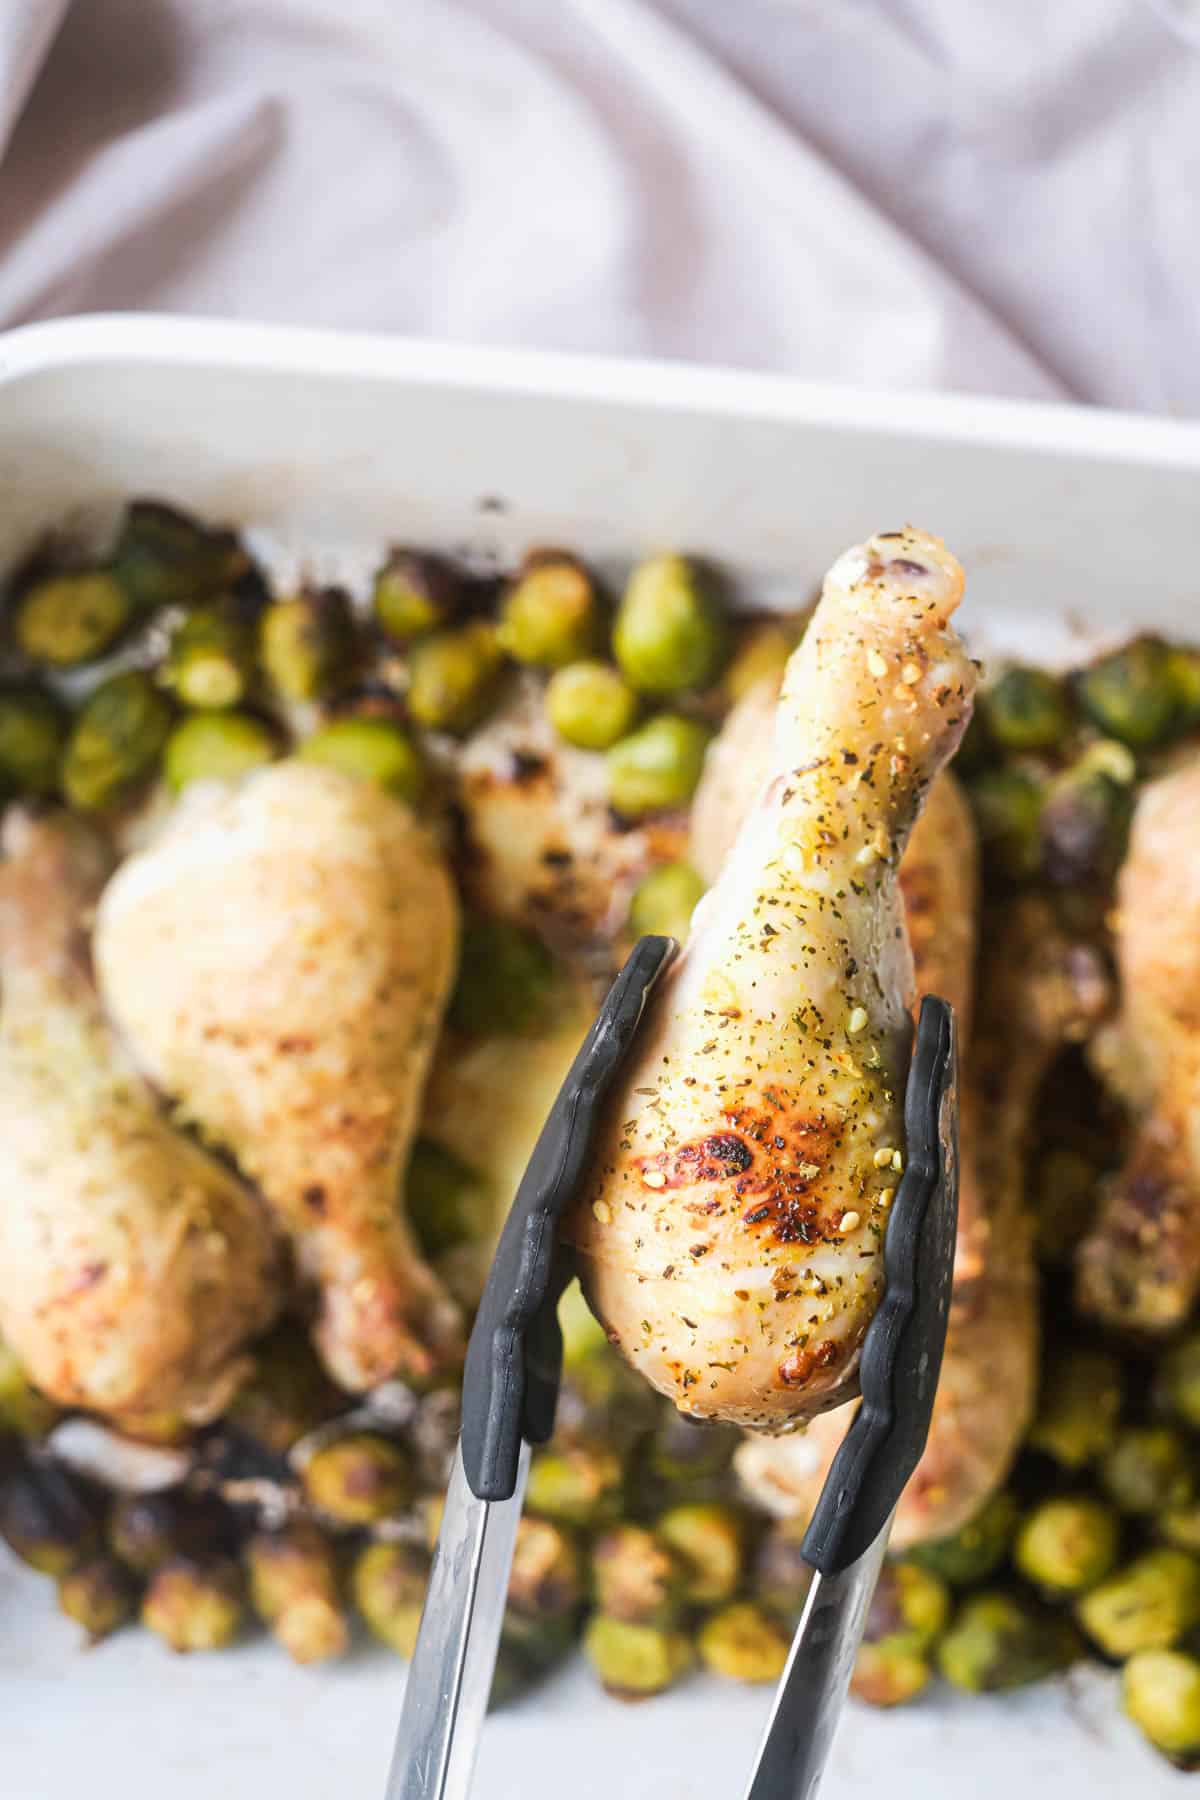 one of the lemon pepper drumsticks being removed from the baking dish with tongs